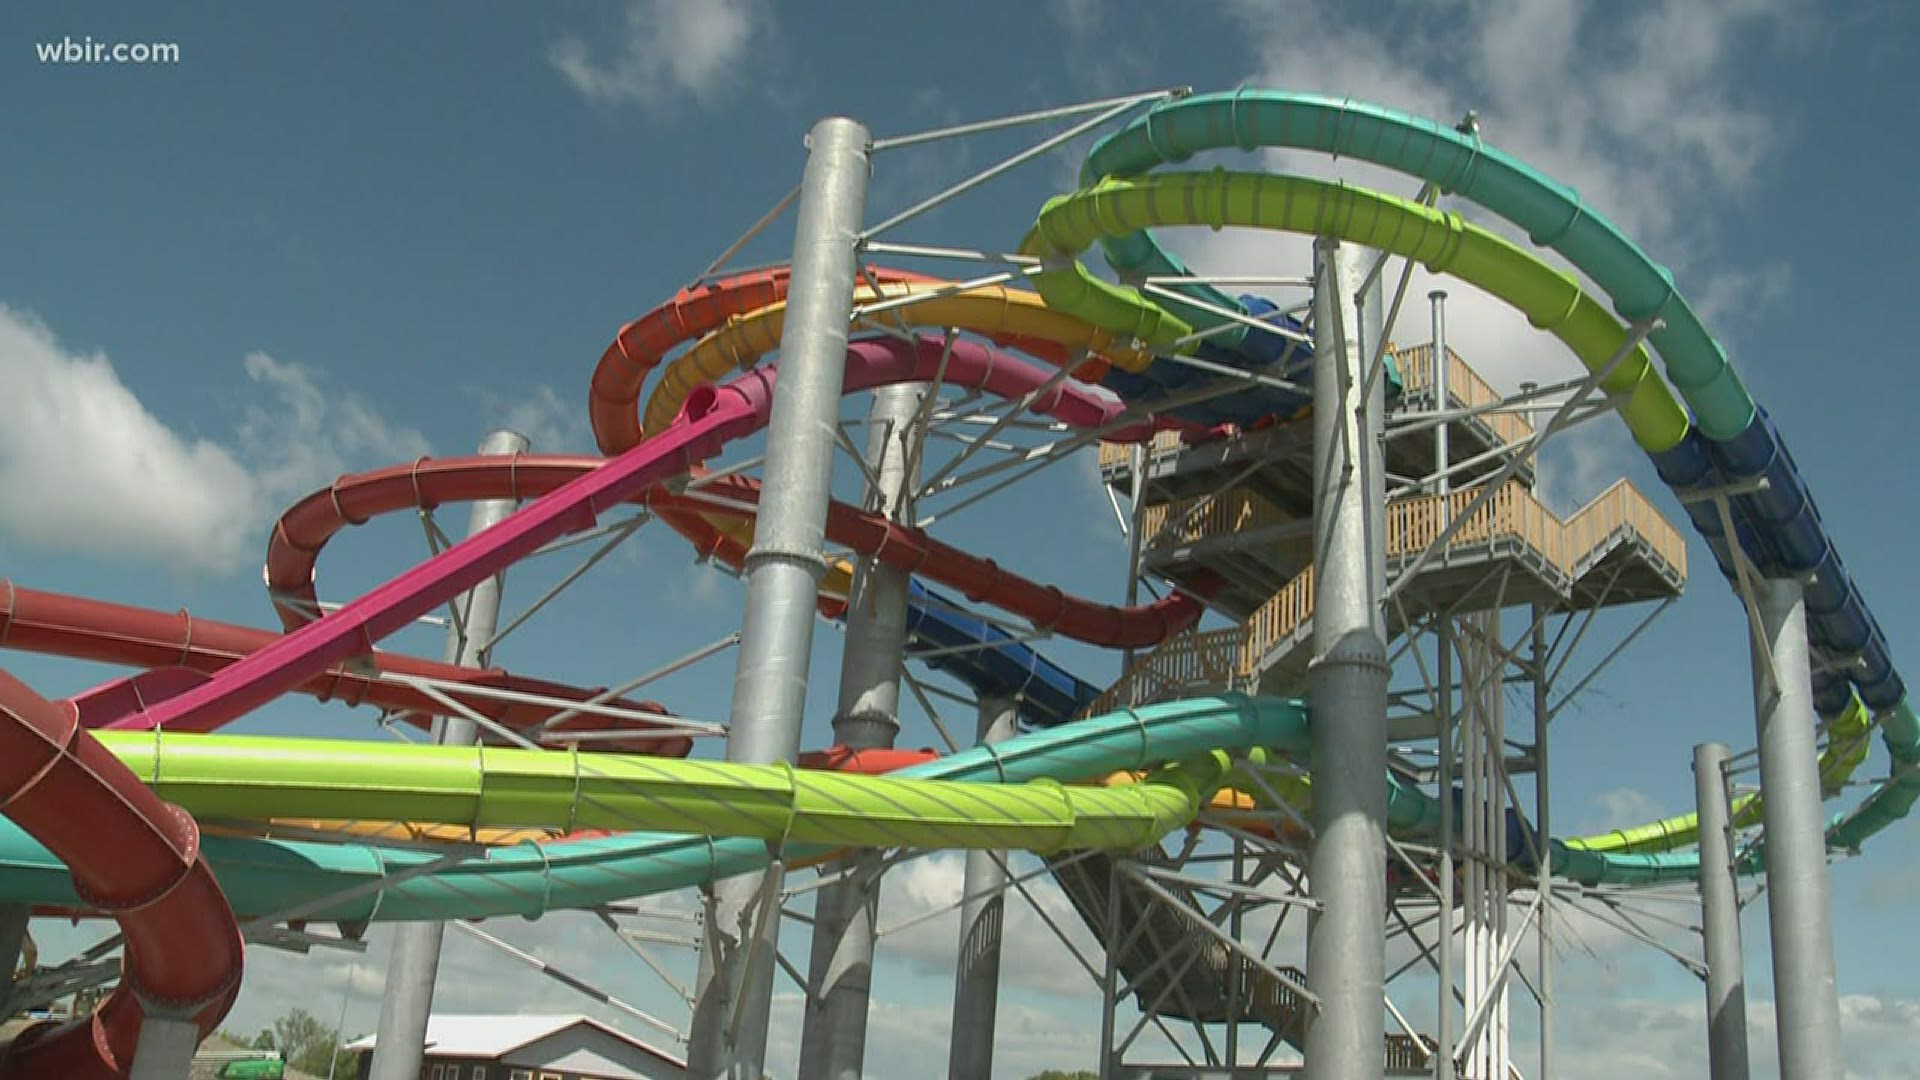 Work on the Smoky Mountain Water Park is almost finished, but there's no opening date because of the coronavirus.